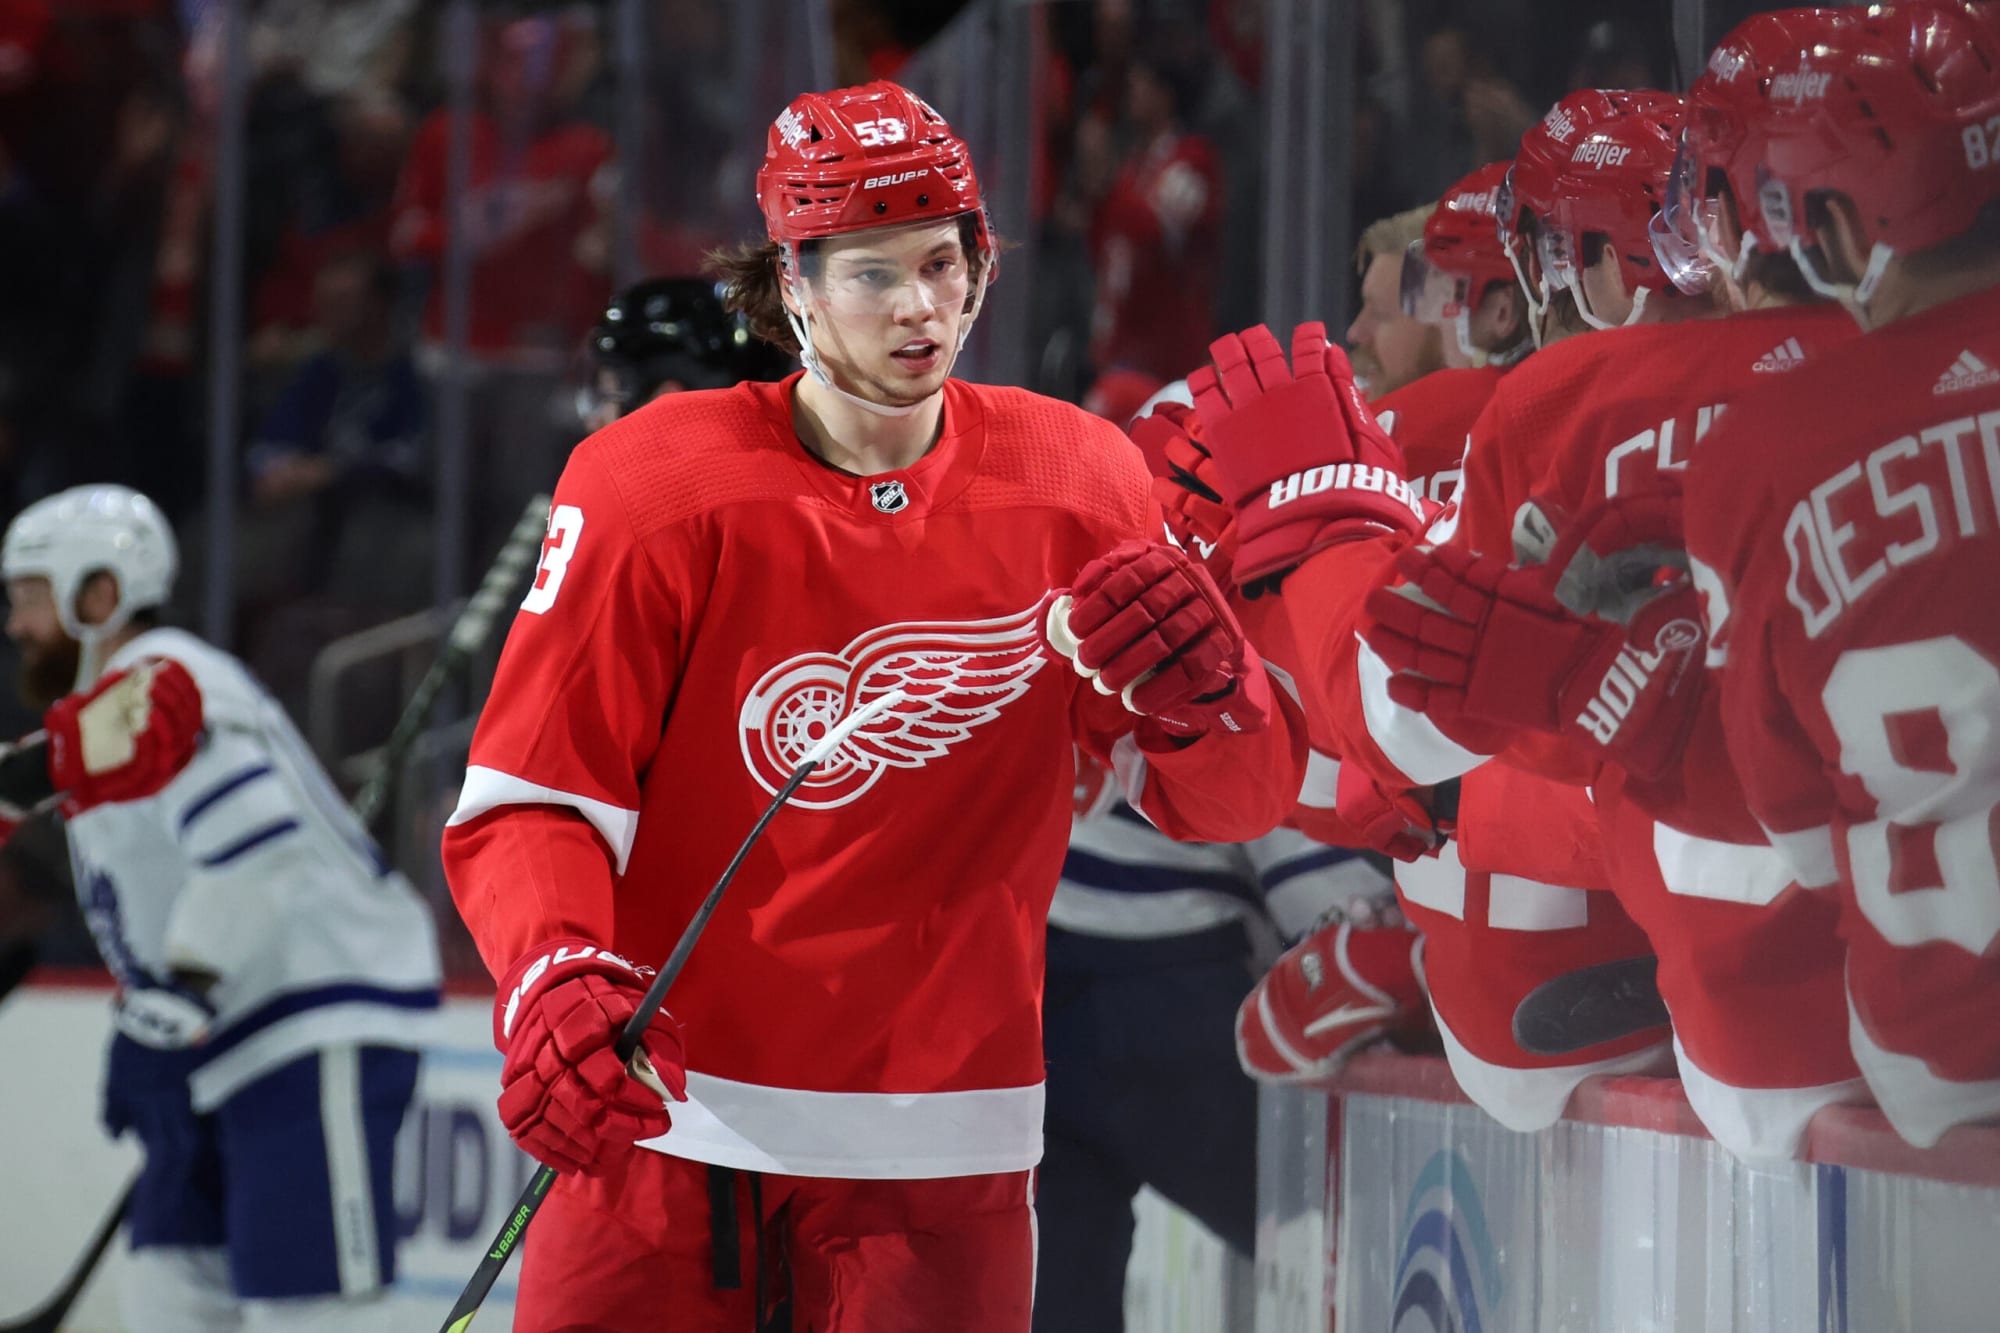 Playoff-hopeful Red Wings beat Rangers